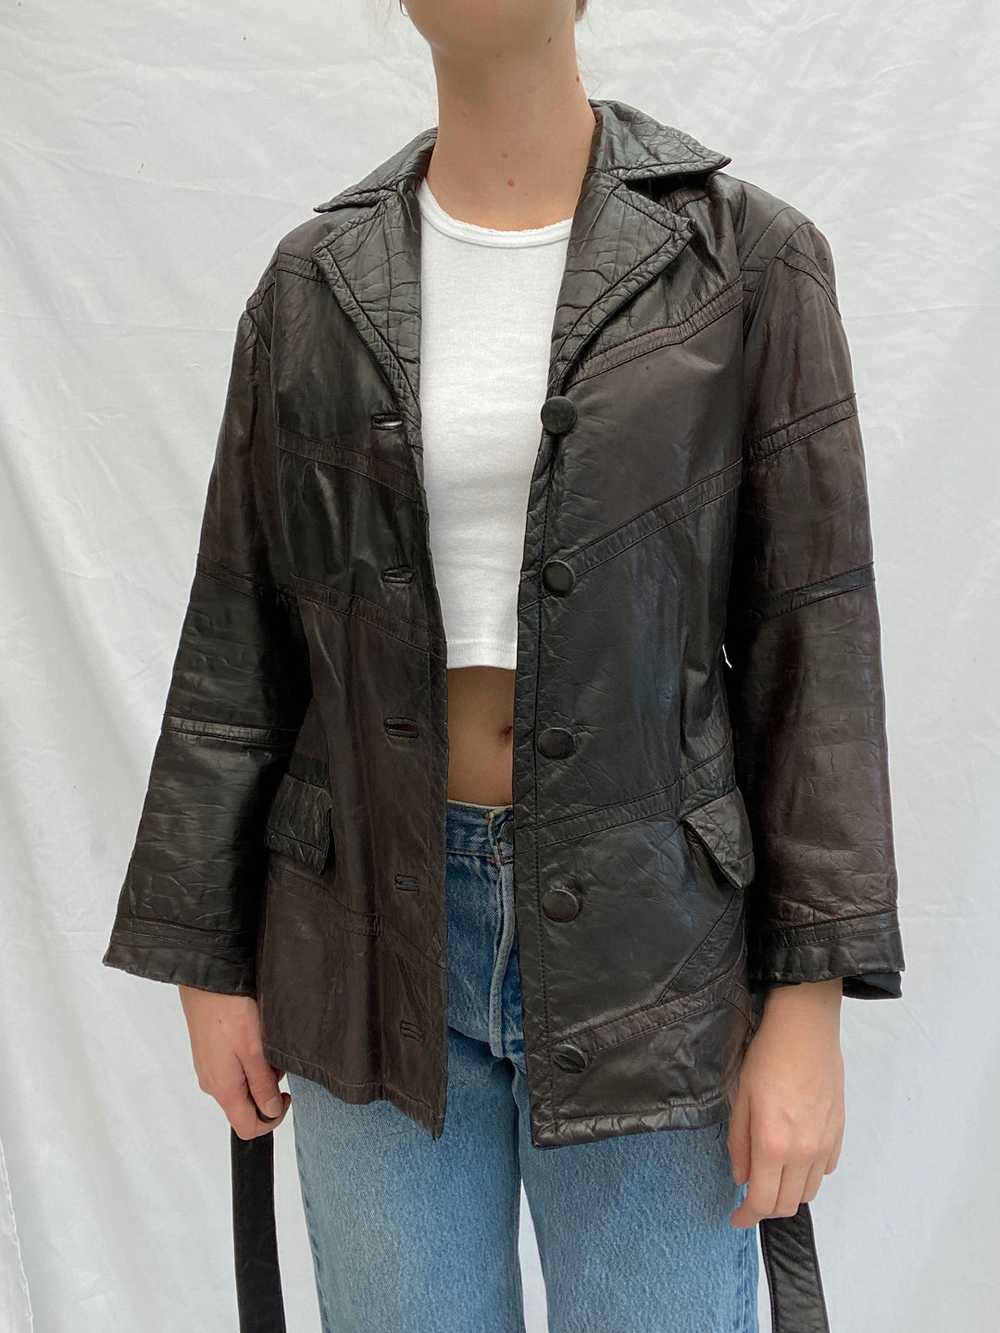 Dark Brown 70's Leather Jacket with Tie - image 2